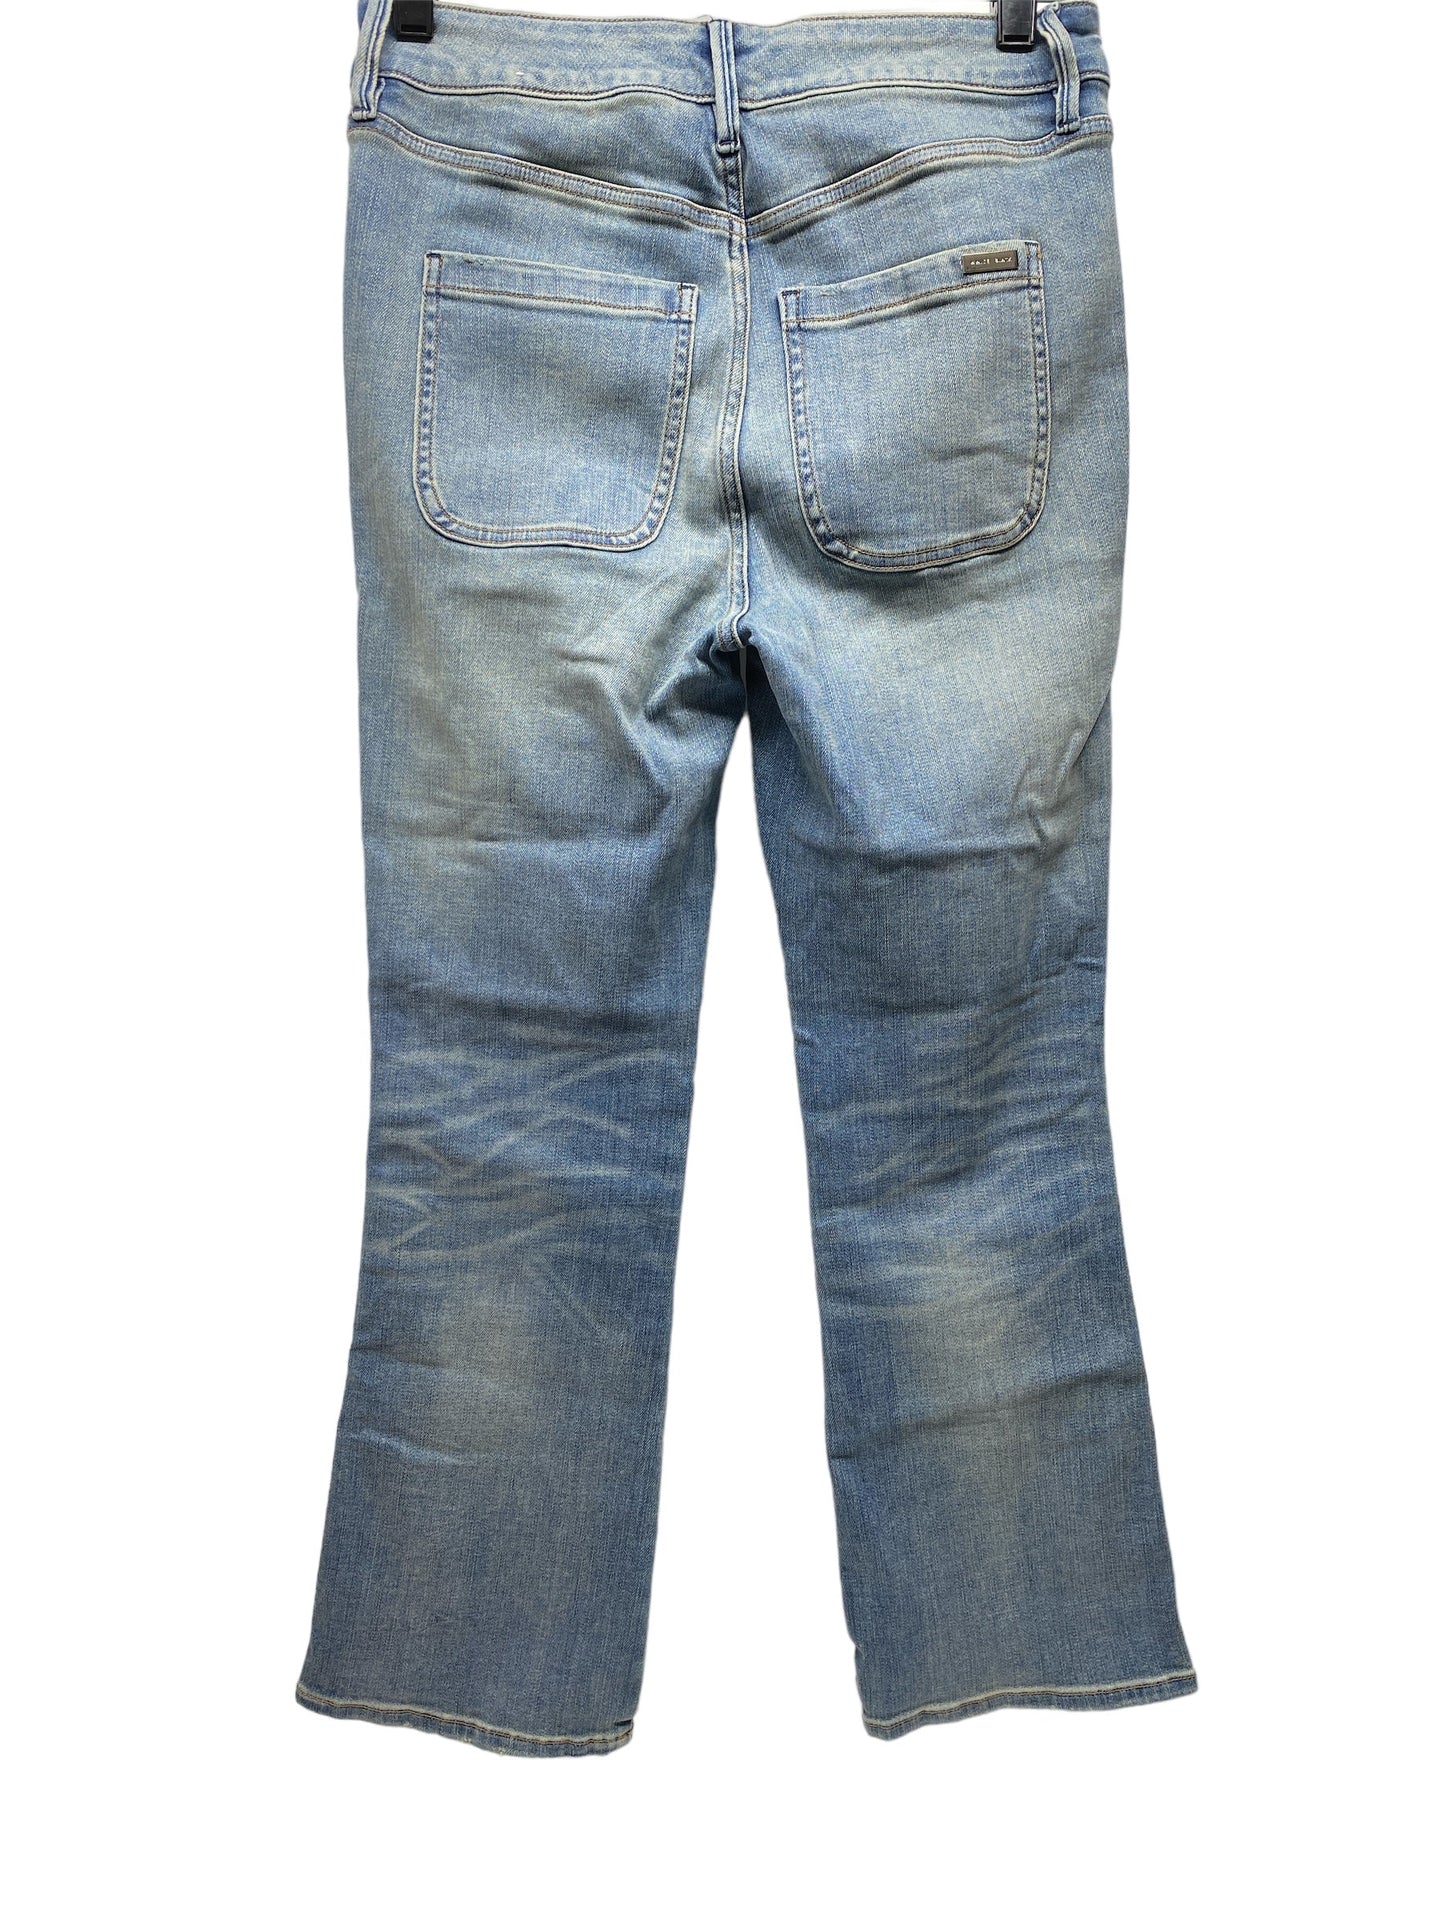 Jeans Flared By White House Black Market  Size: 2